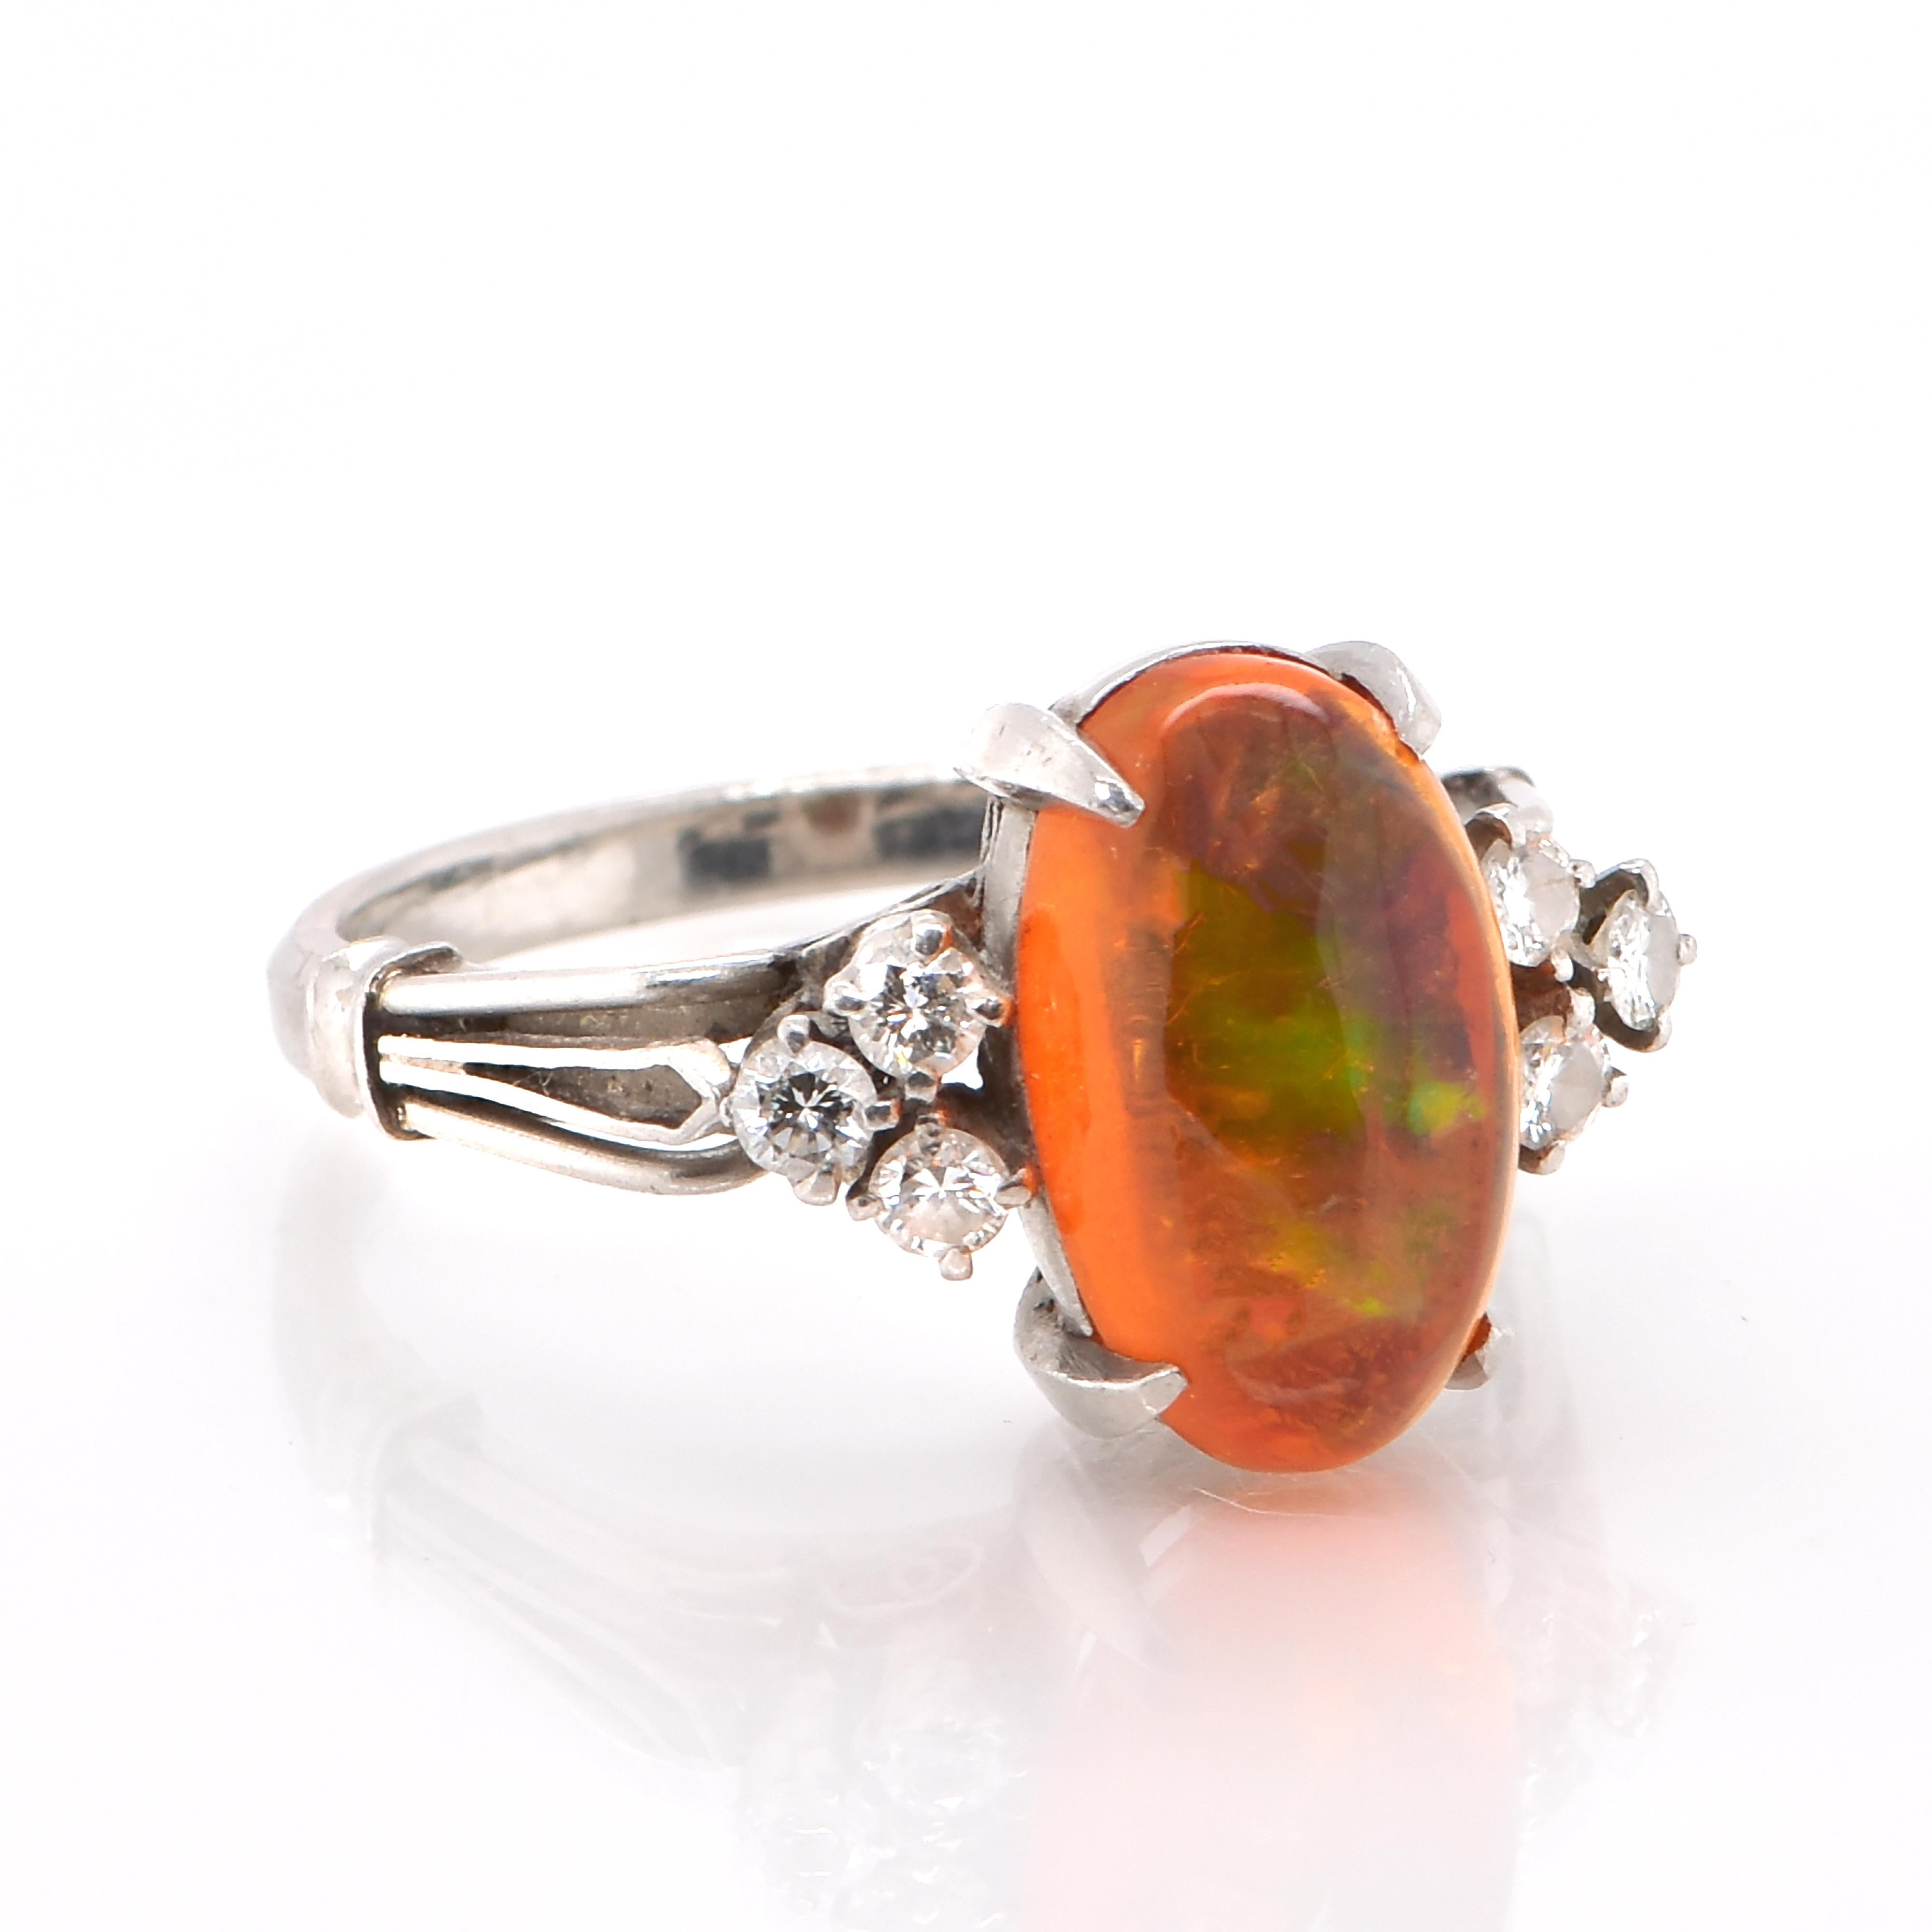 A beautiful ring featuring a 3.15 Carat Natural Mexican Fire Opal and 0.22 Carats of Diamond Accents set in Platinum. Opals are known for exhibiting flashes of rainbow colors known as 